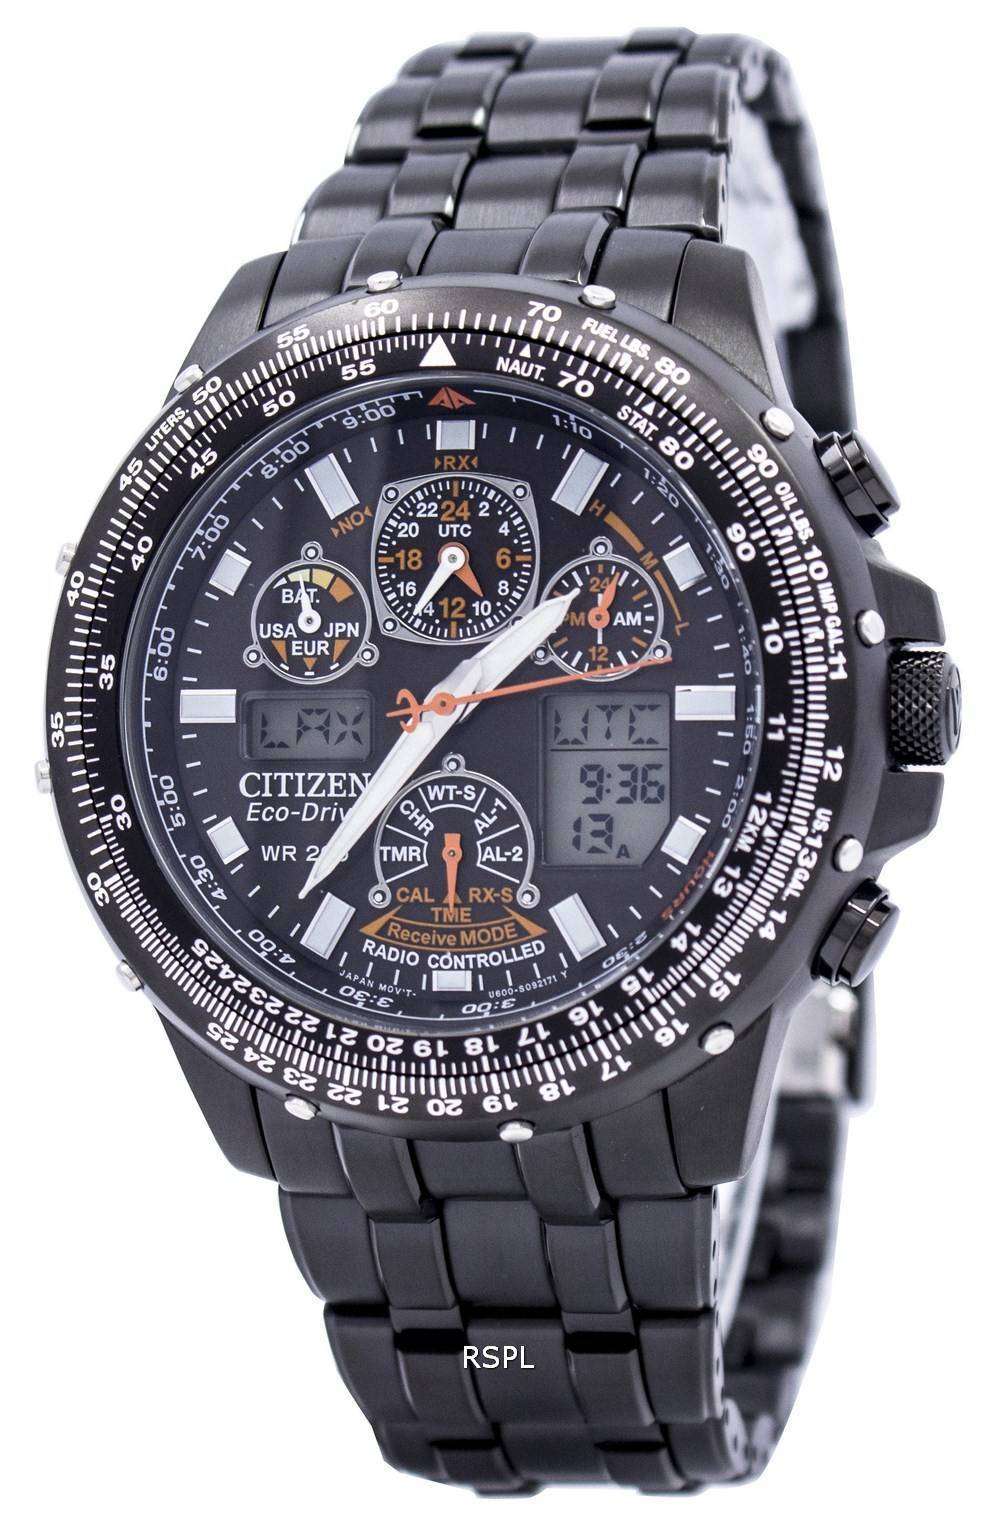 ☆US大人気商品レア逆輸入☆CITIZEN Eco-Drive Promaster Watch